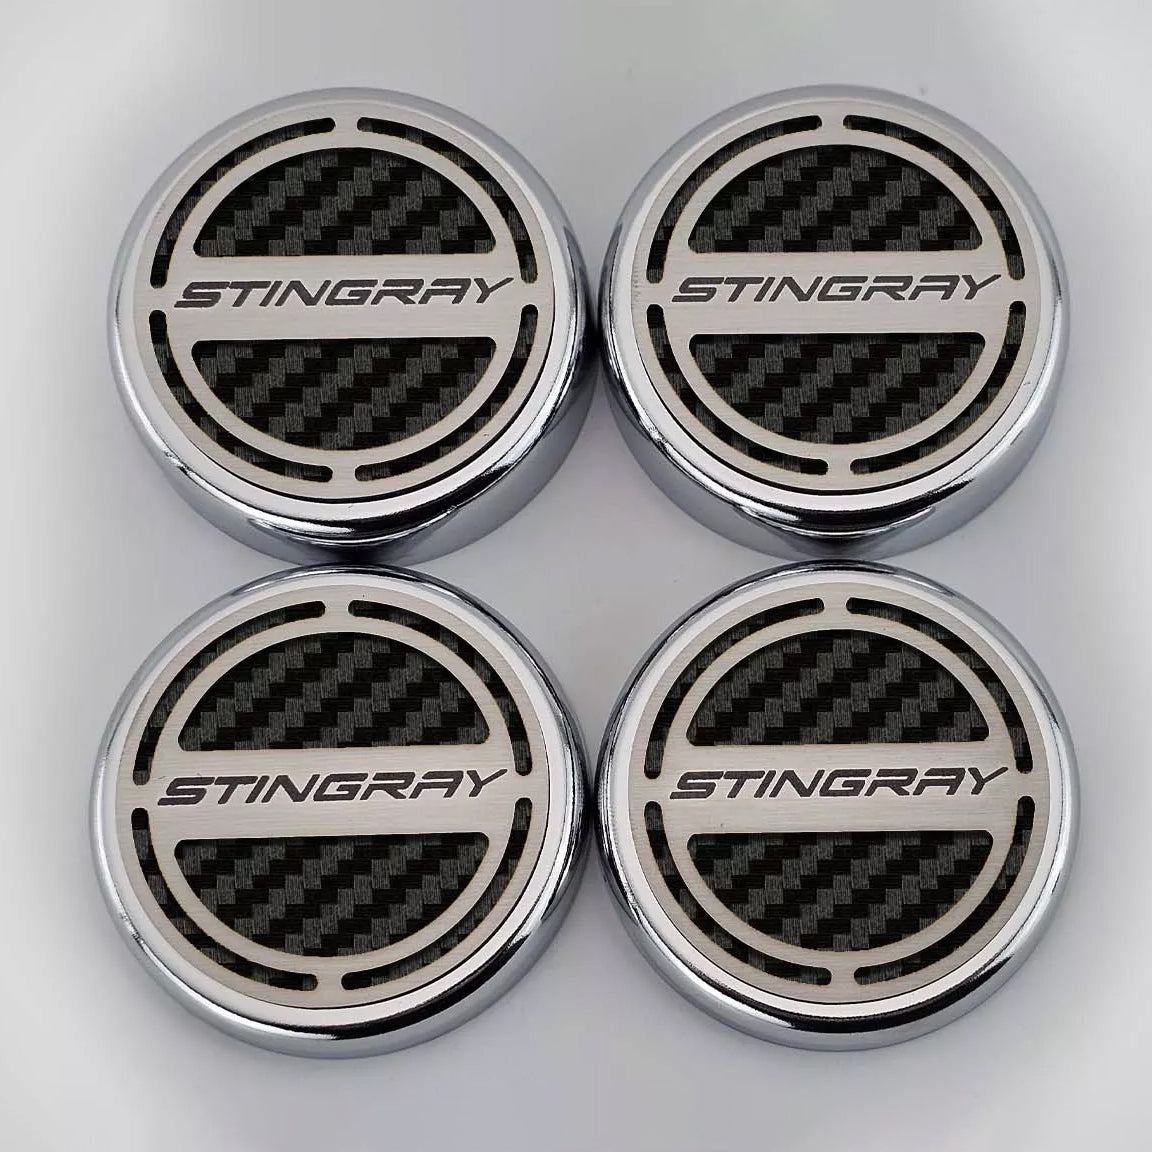 2020-2024 C8 Corvette Coupe - Cap Cover Set 4pc Carbon Fiber Inserts with Stainless Stingray Logo - Polished/Brushed Finish